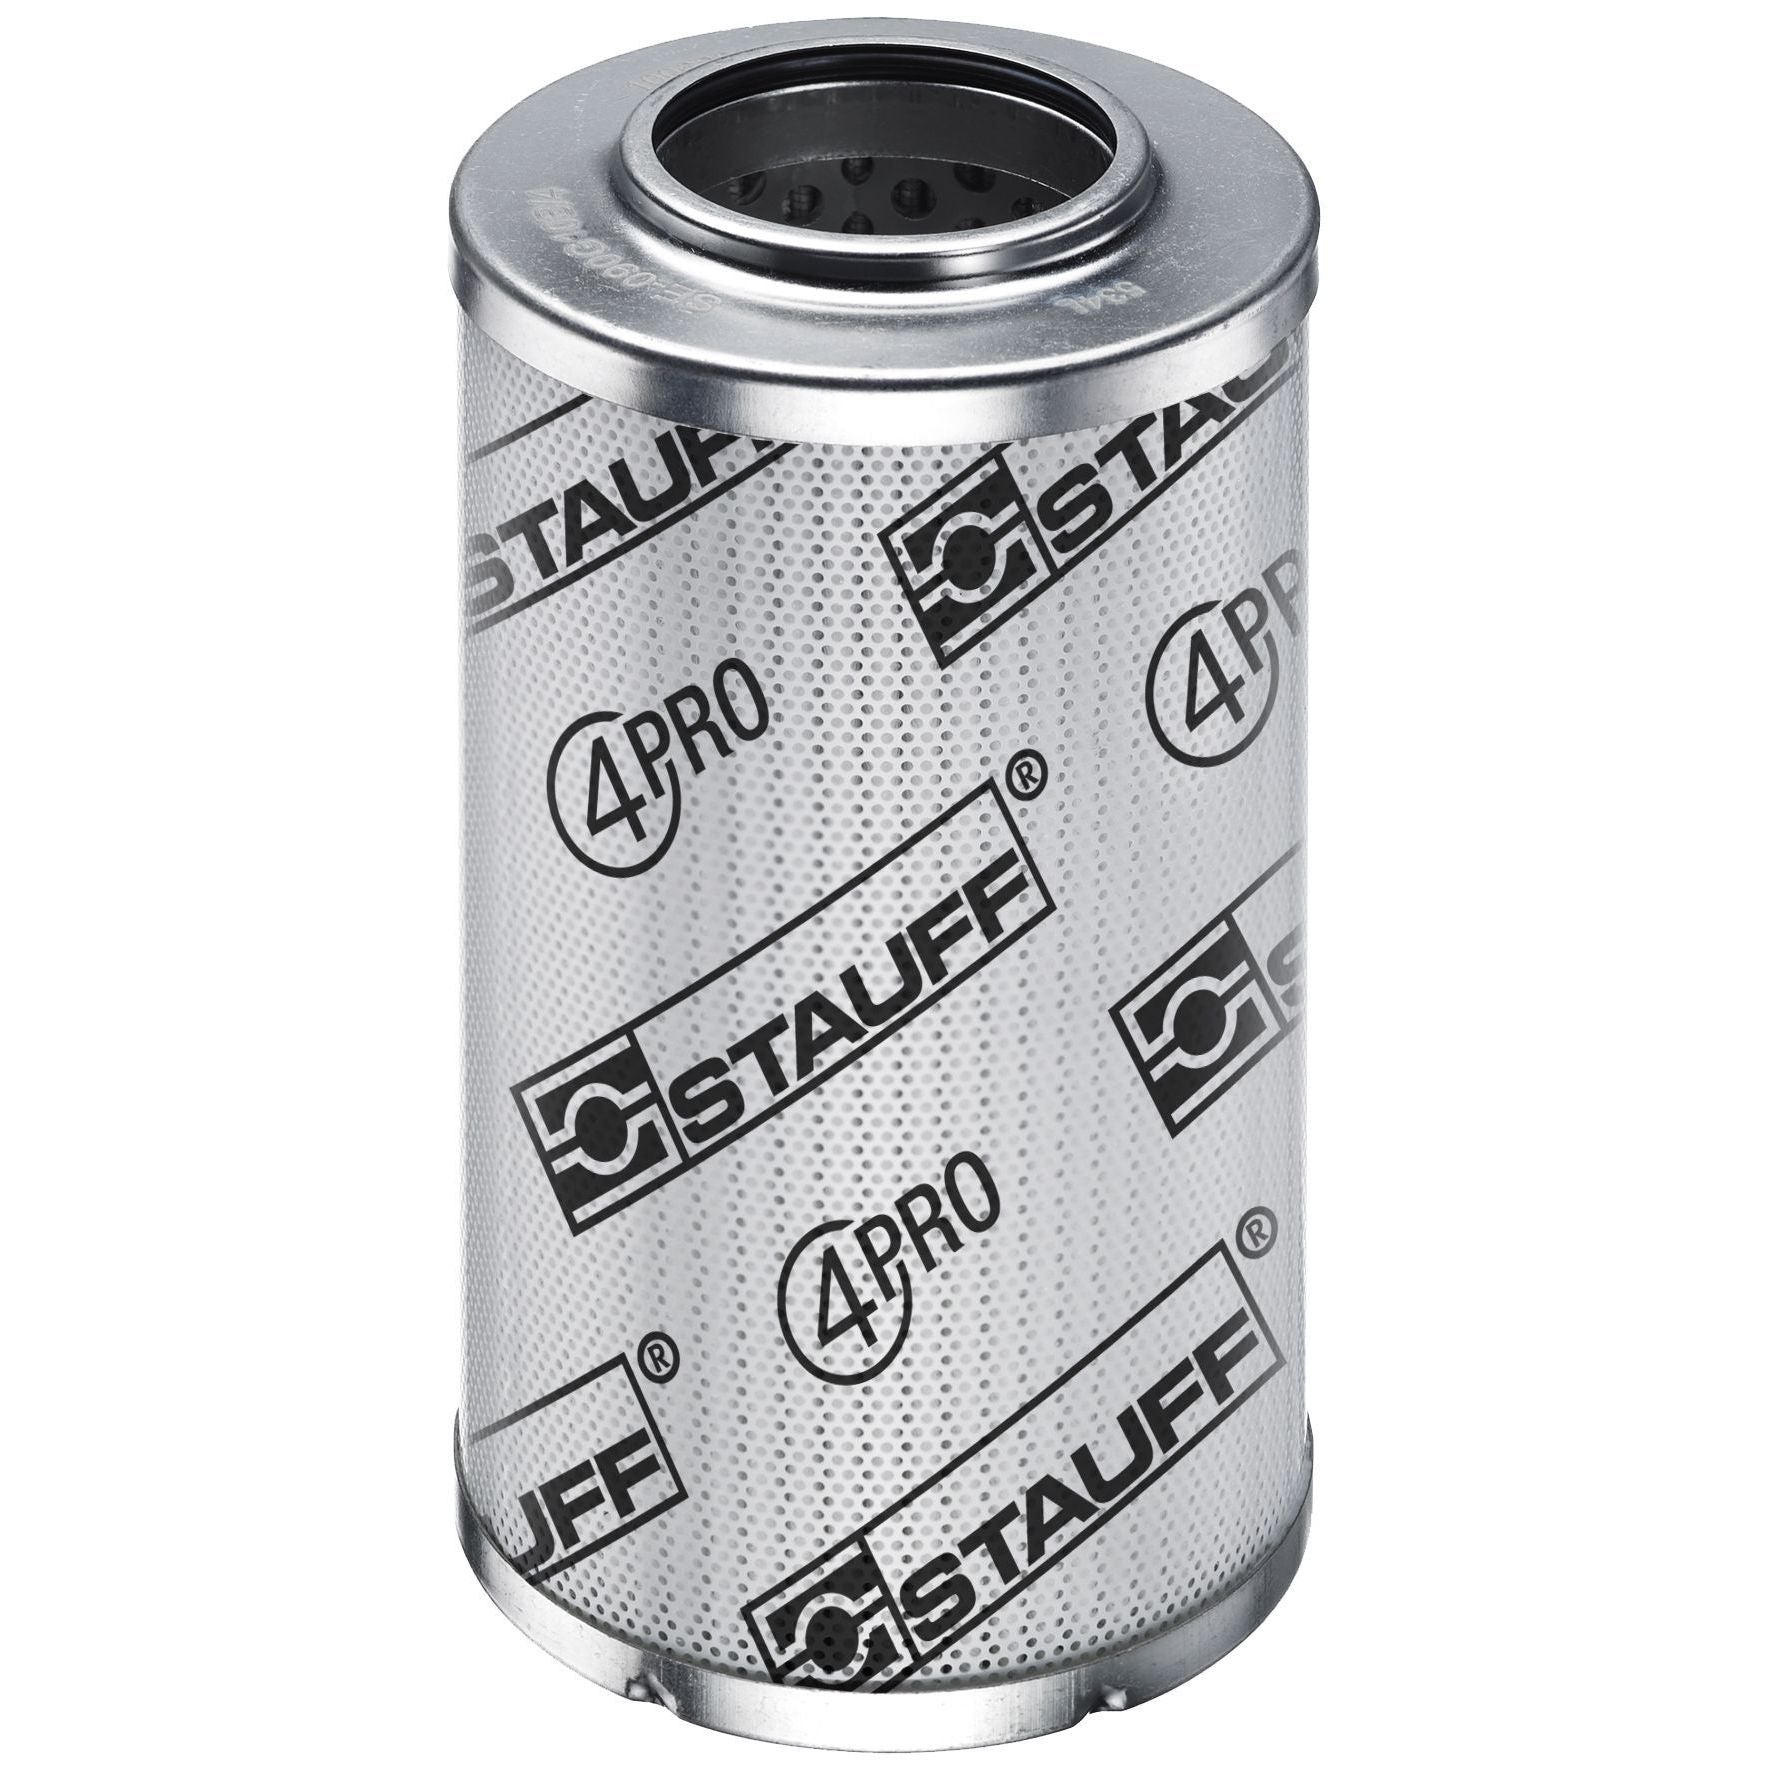 SE-014-H-03-B/4 : Stauff SF-014 Series Filter Element, 3 Micron, Synthetic, 3045psi Collapse Differential, Buna